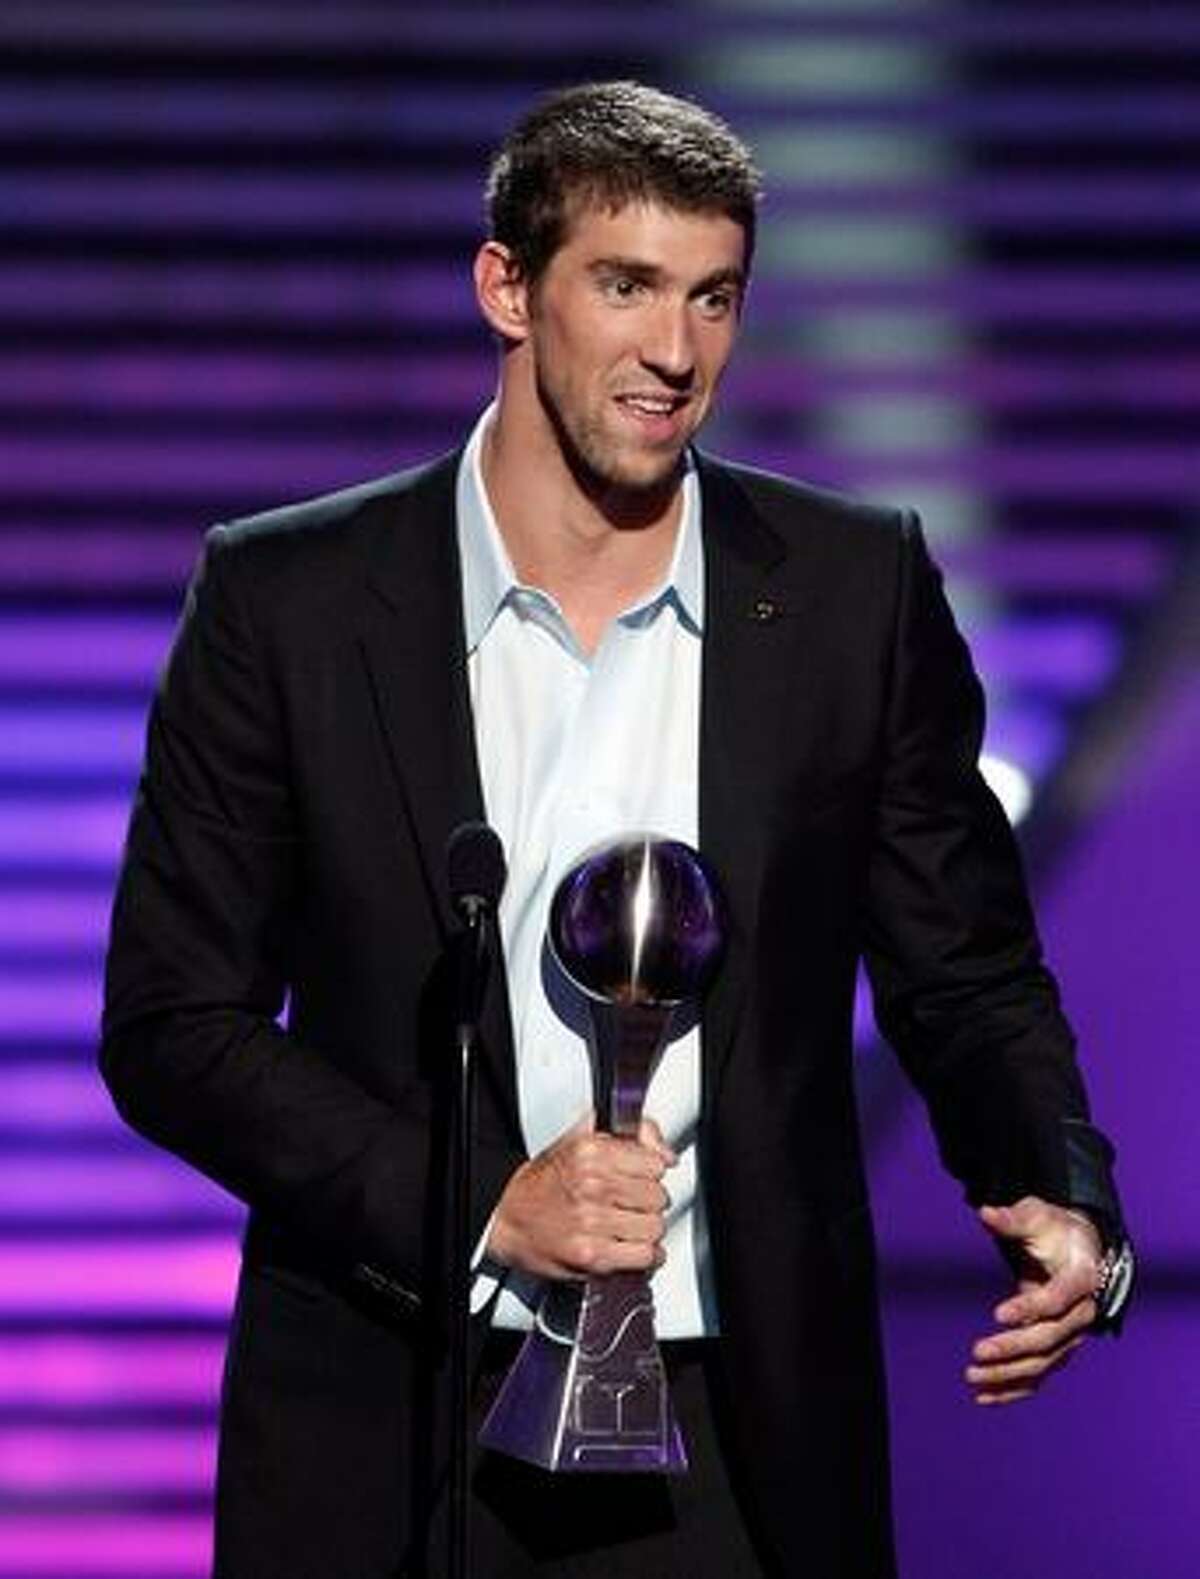 Olympic gold medalist swimmer Michael Phelps accepts the Best Championship Performance award onstage during the 2009 ESPY Awards held at Nokia Theatre LA Live in Los Angeles on Wednesday, July 15, 2009. The 17th annual ESPYs will air on Sunday, July 19 at 6 p.m. PDT on ESPN.